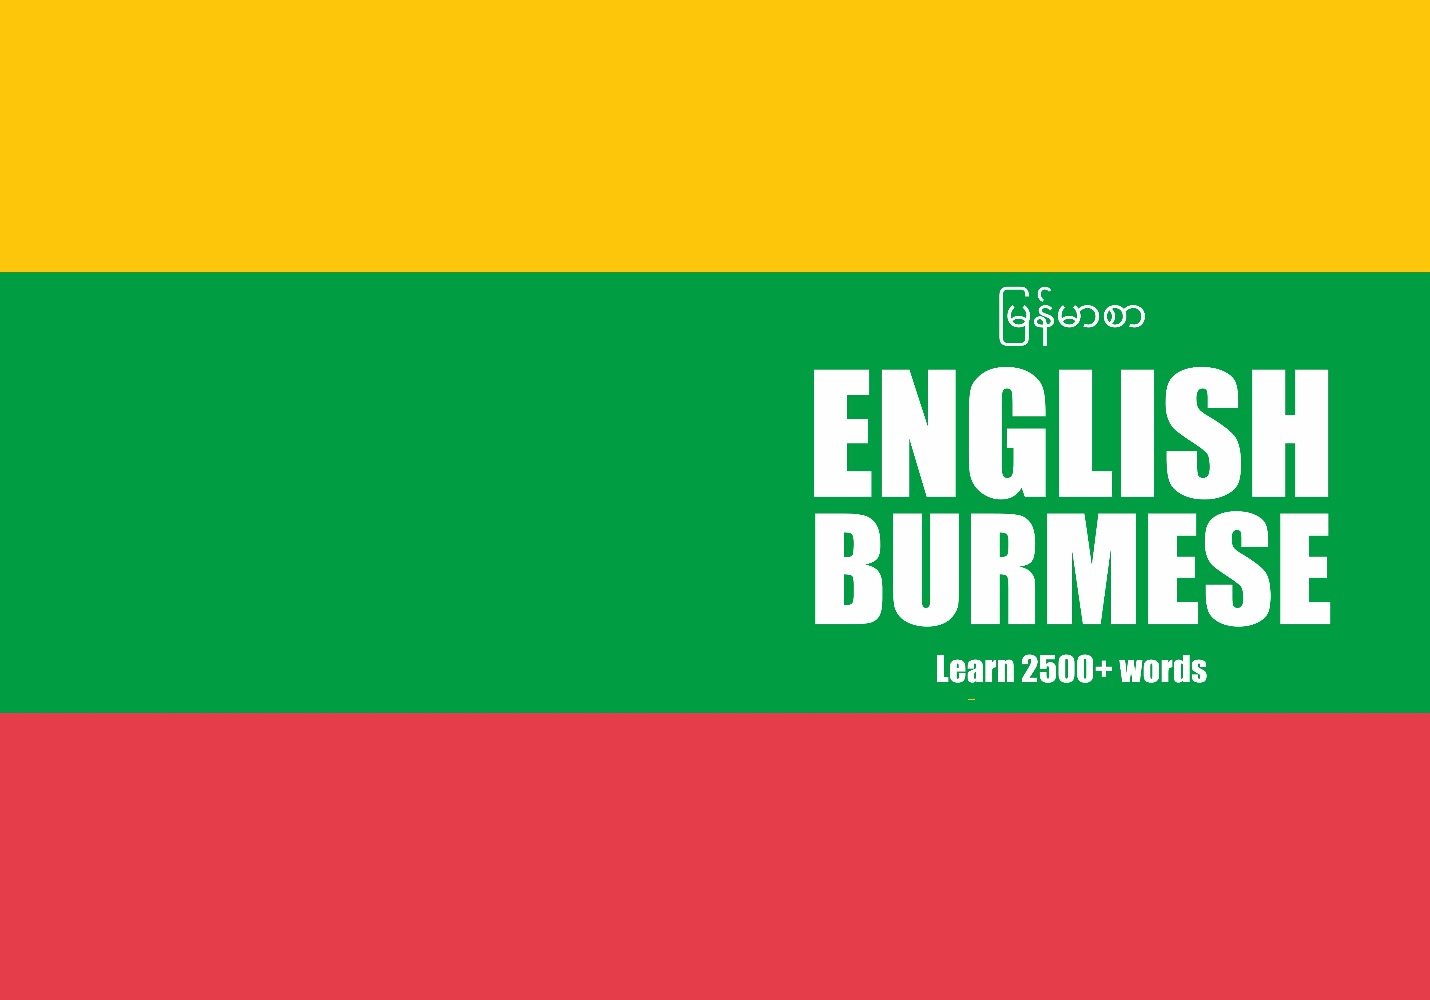 Burmese language learning notebook cover